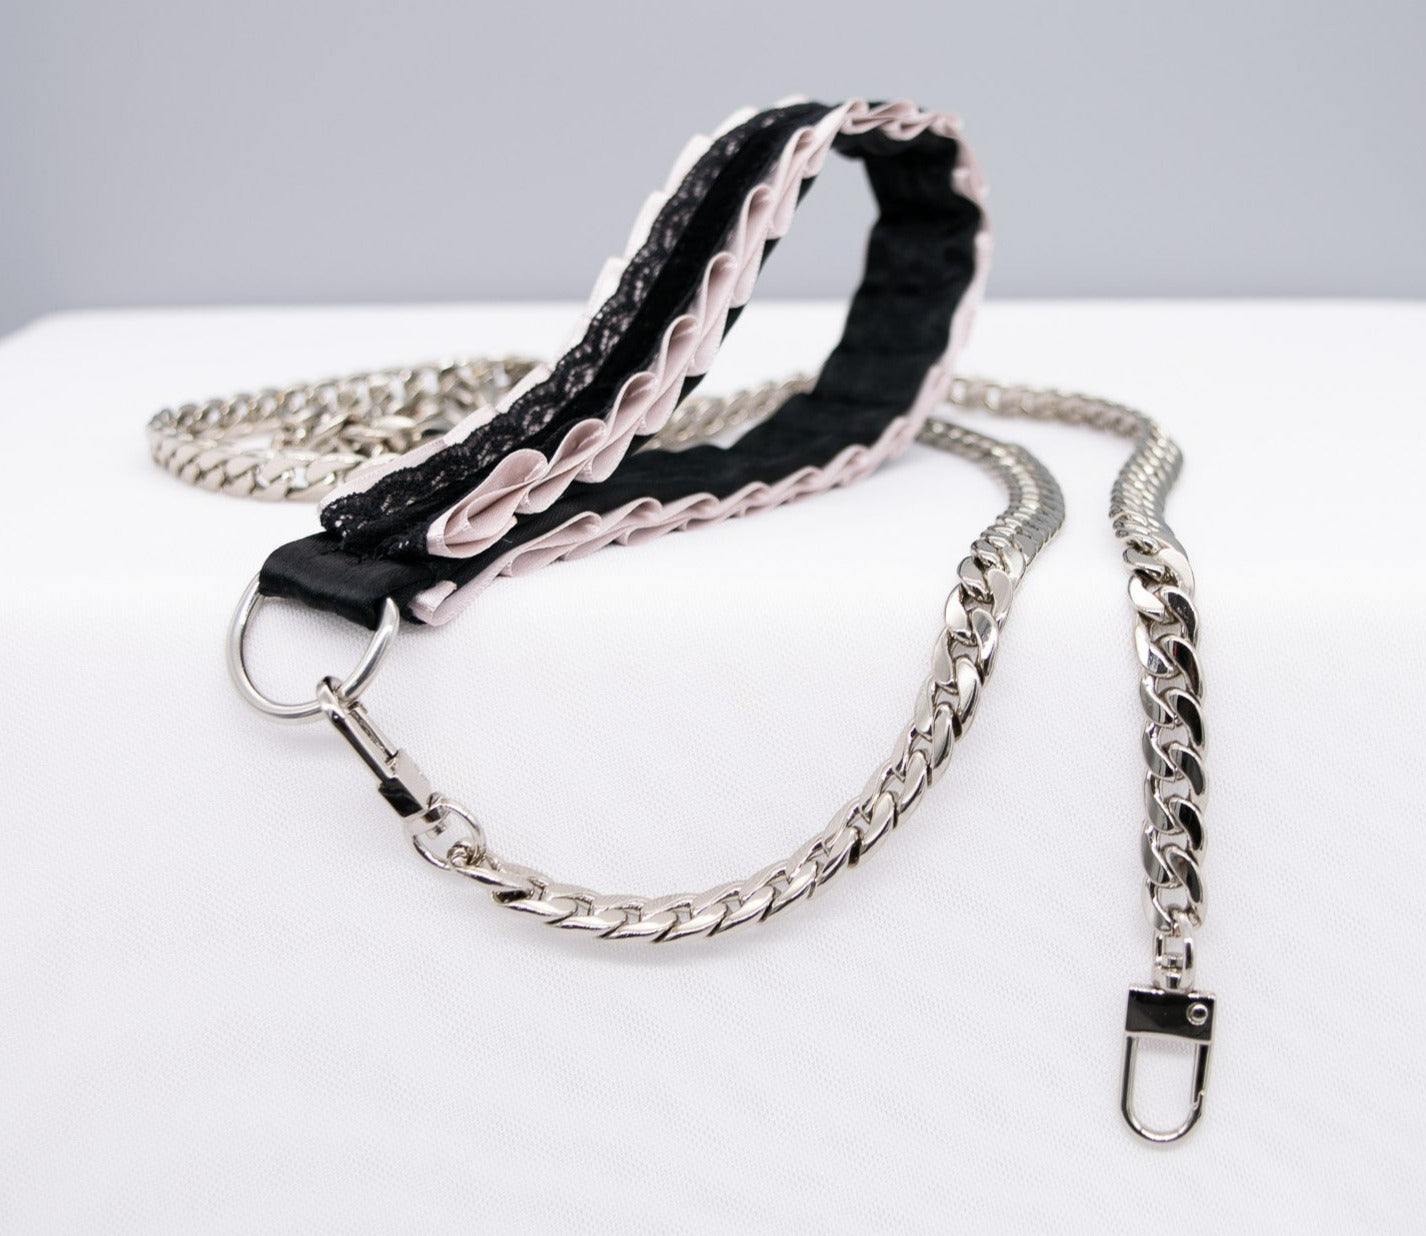 Dusty Lilac and Black Velvet Silver Leash